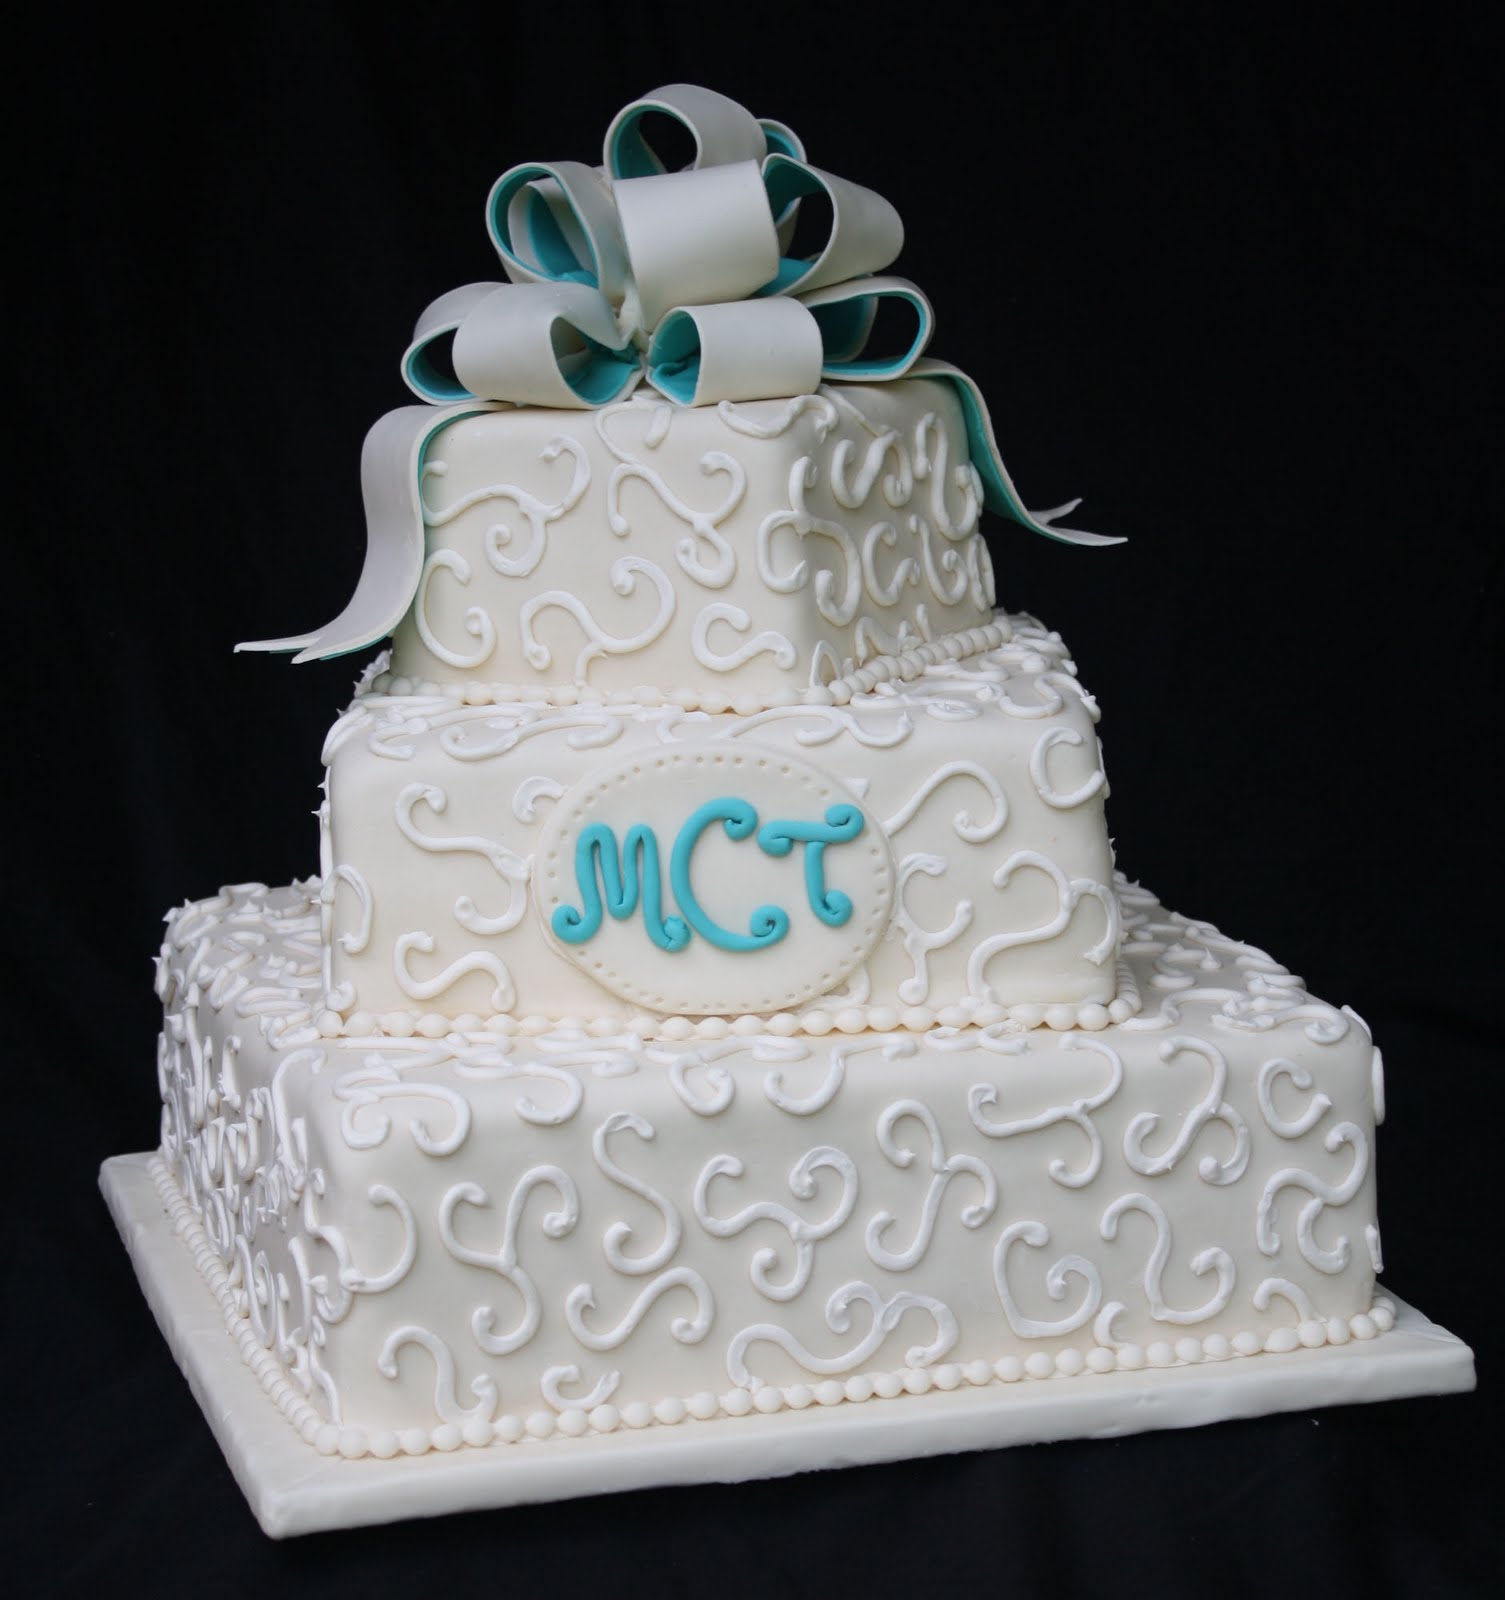 An Ivory and Teal Wedding  Cake 